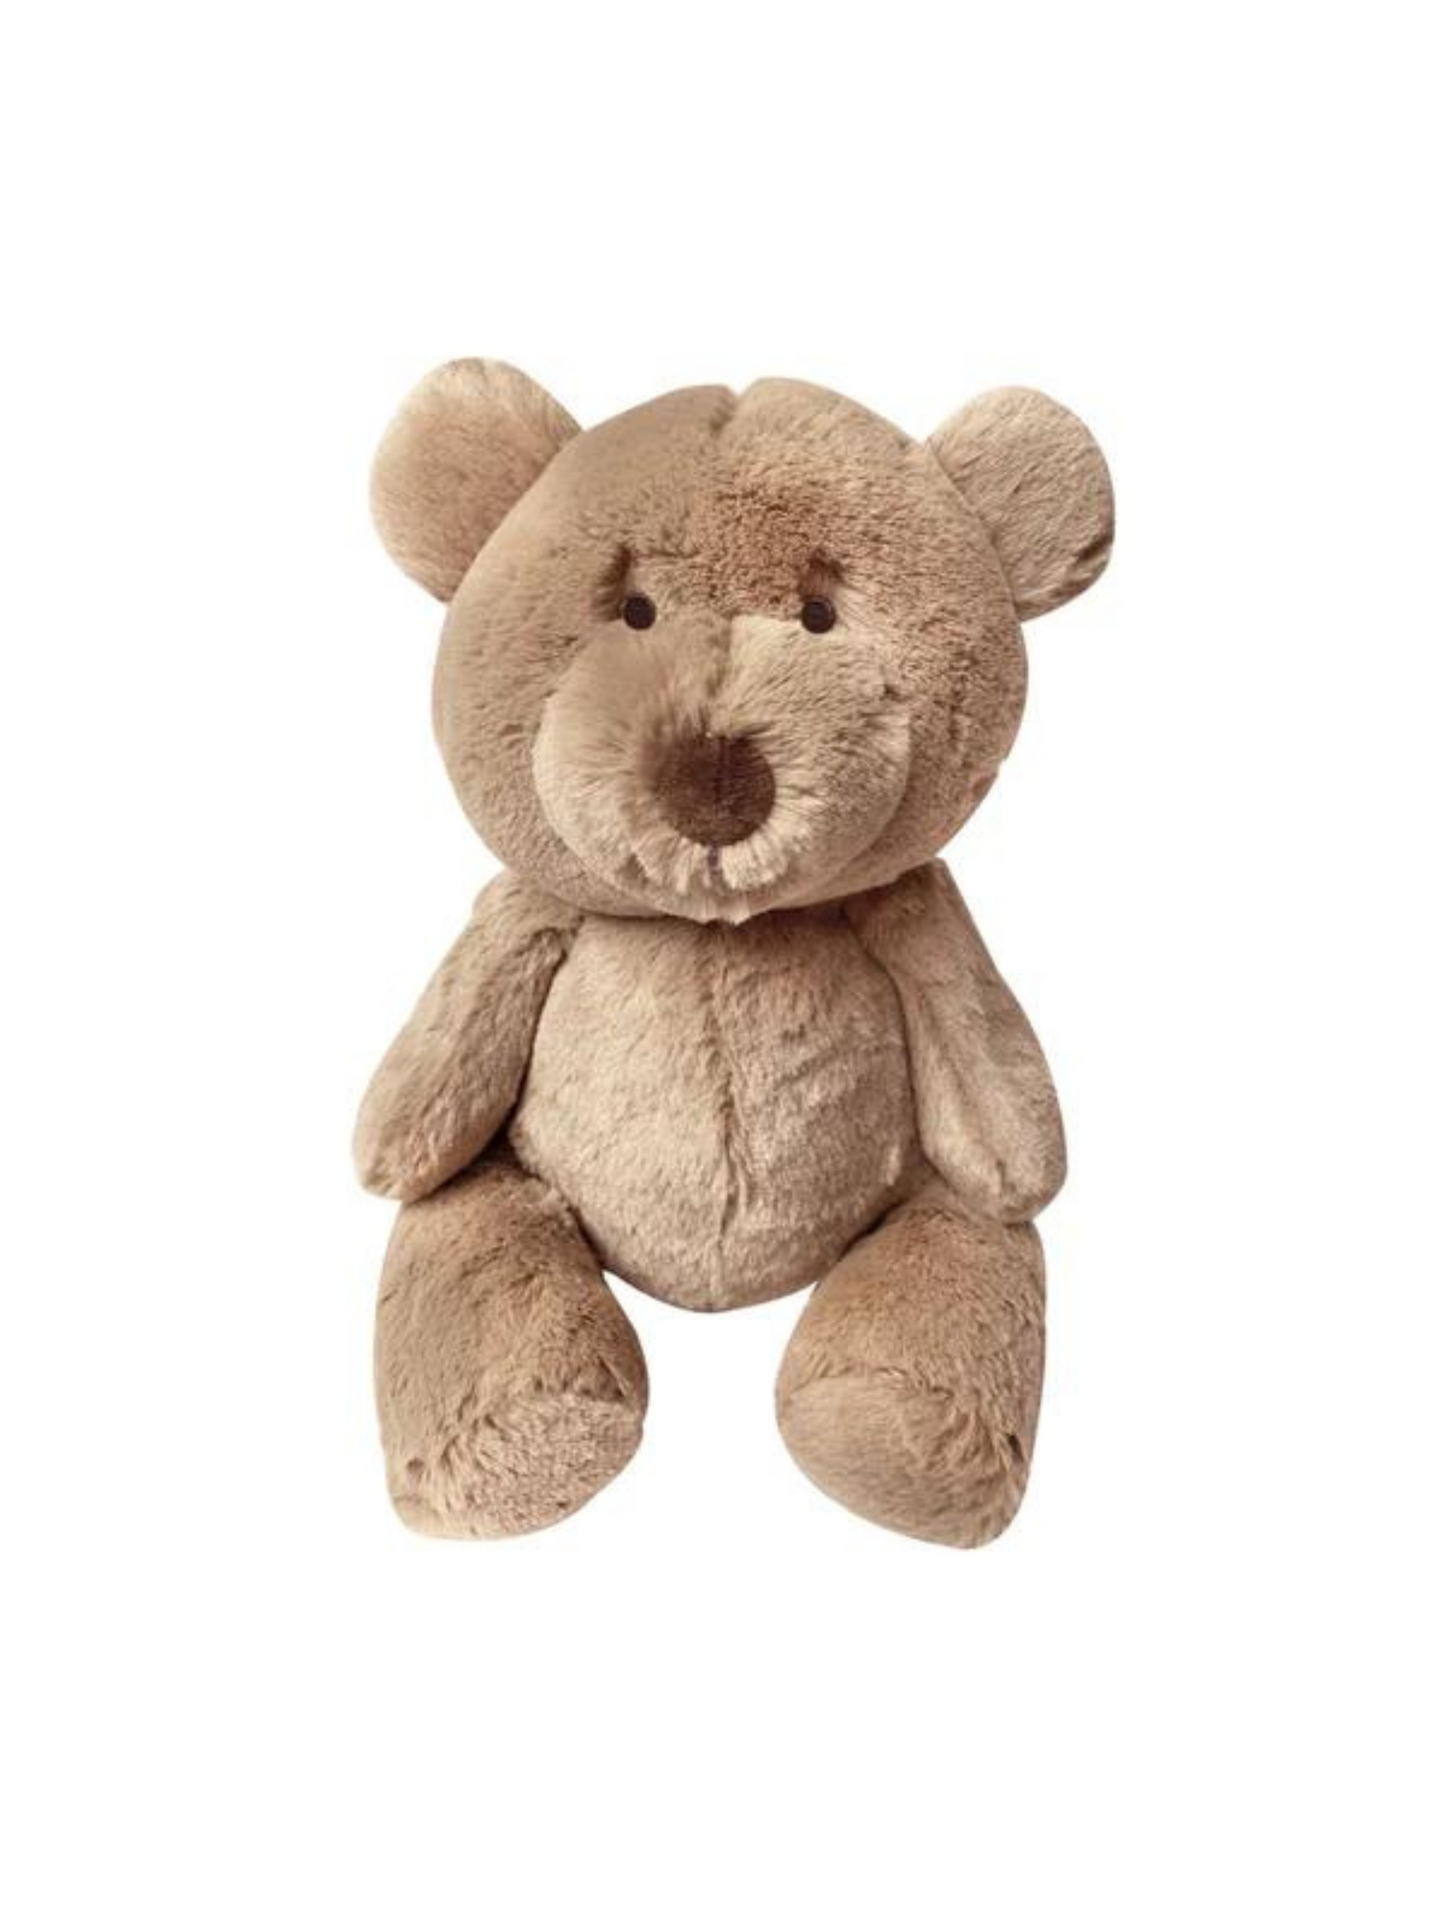 O.B. DESIGNS CYPRESS BEAR SOFT TOY - THE LITTLE EAGLE BOUTIQUE